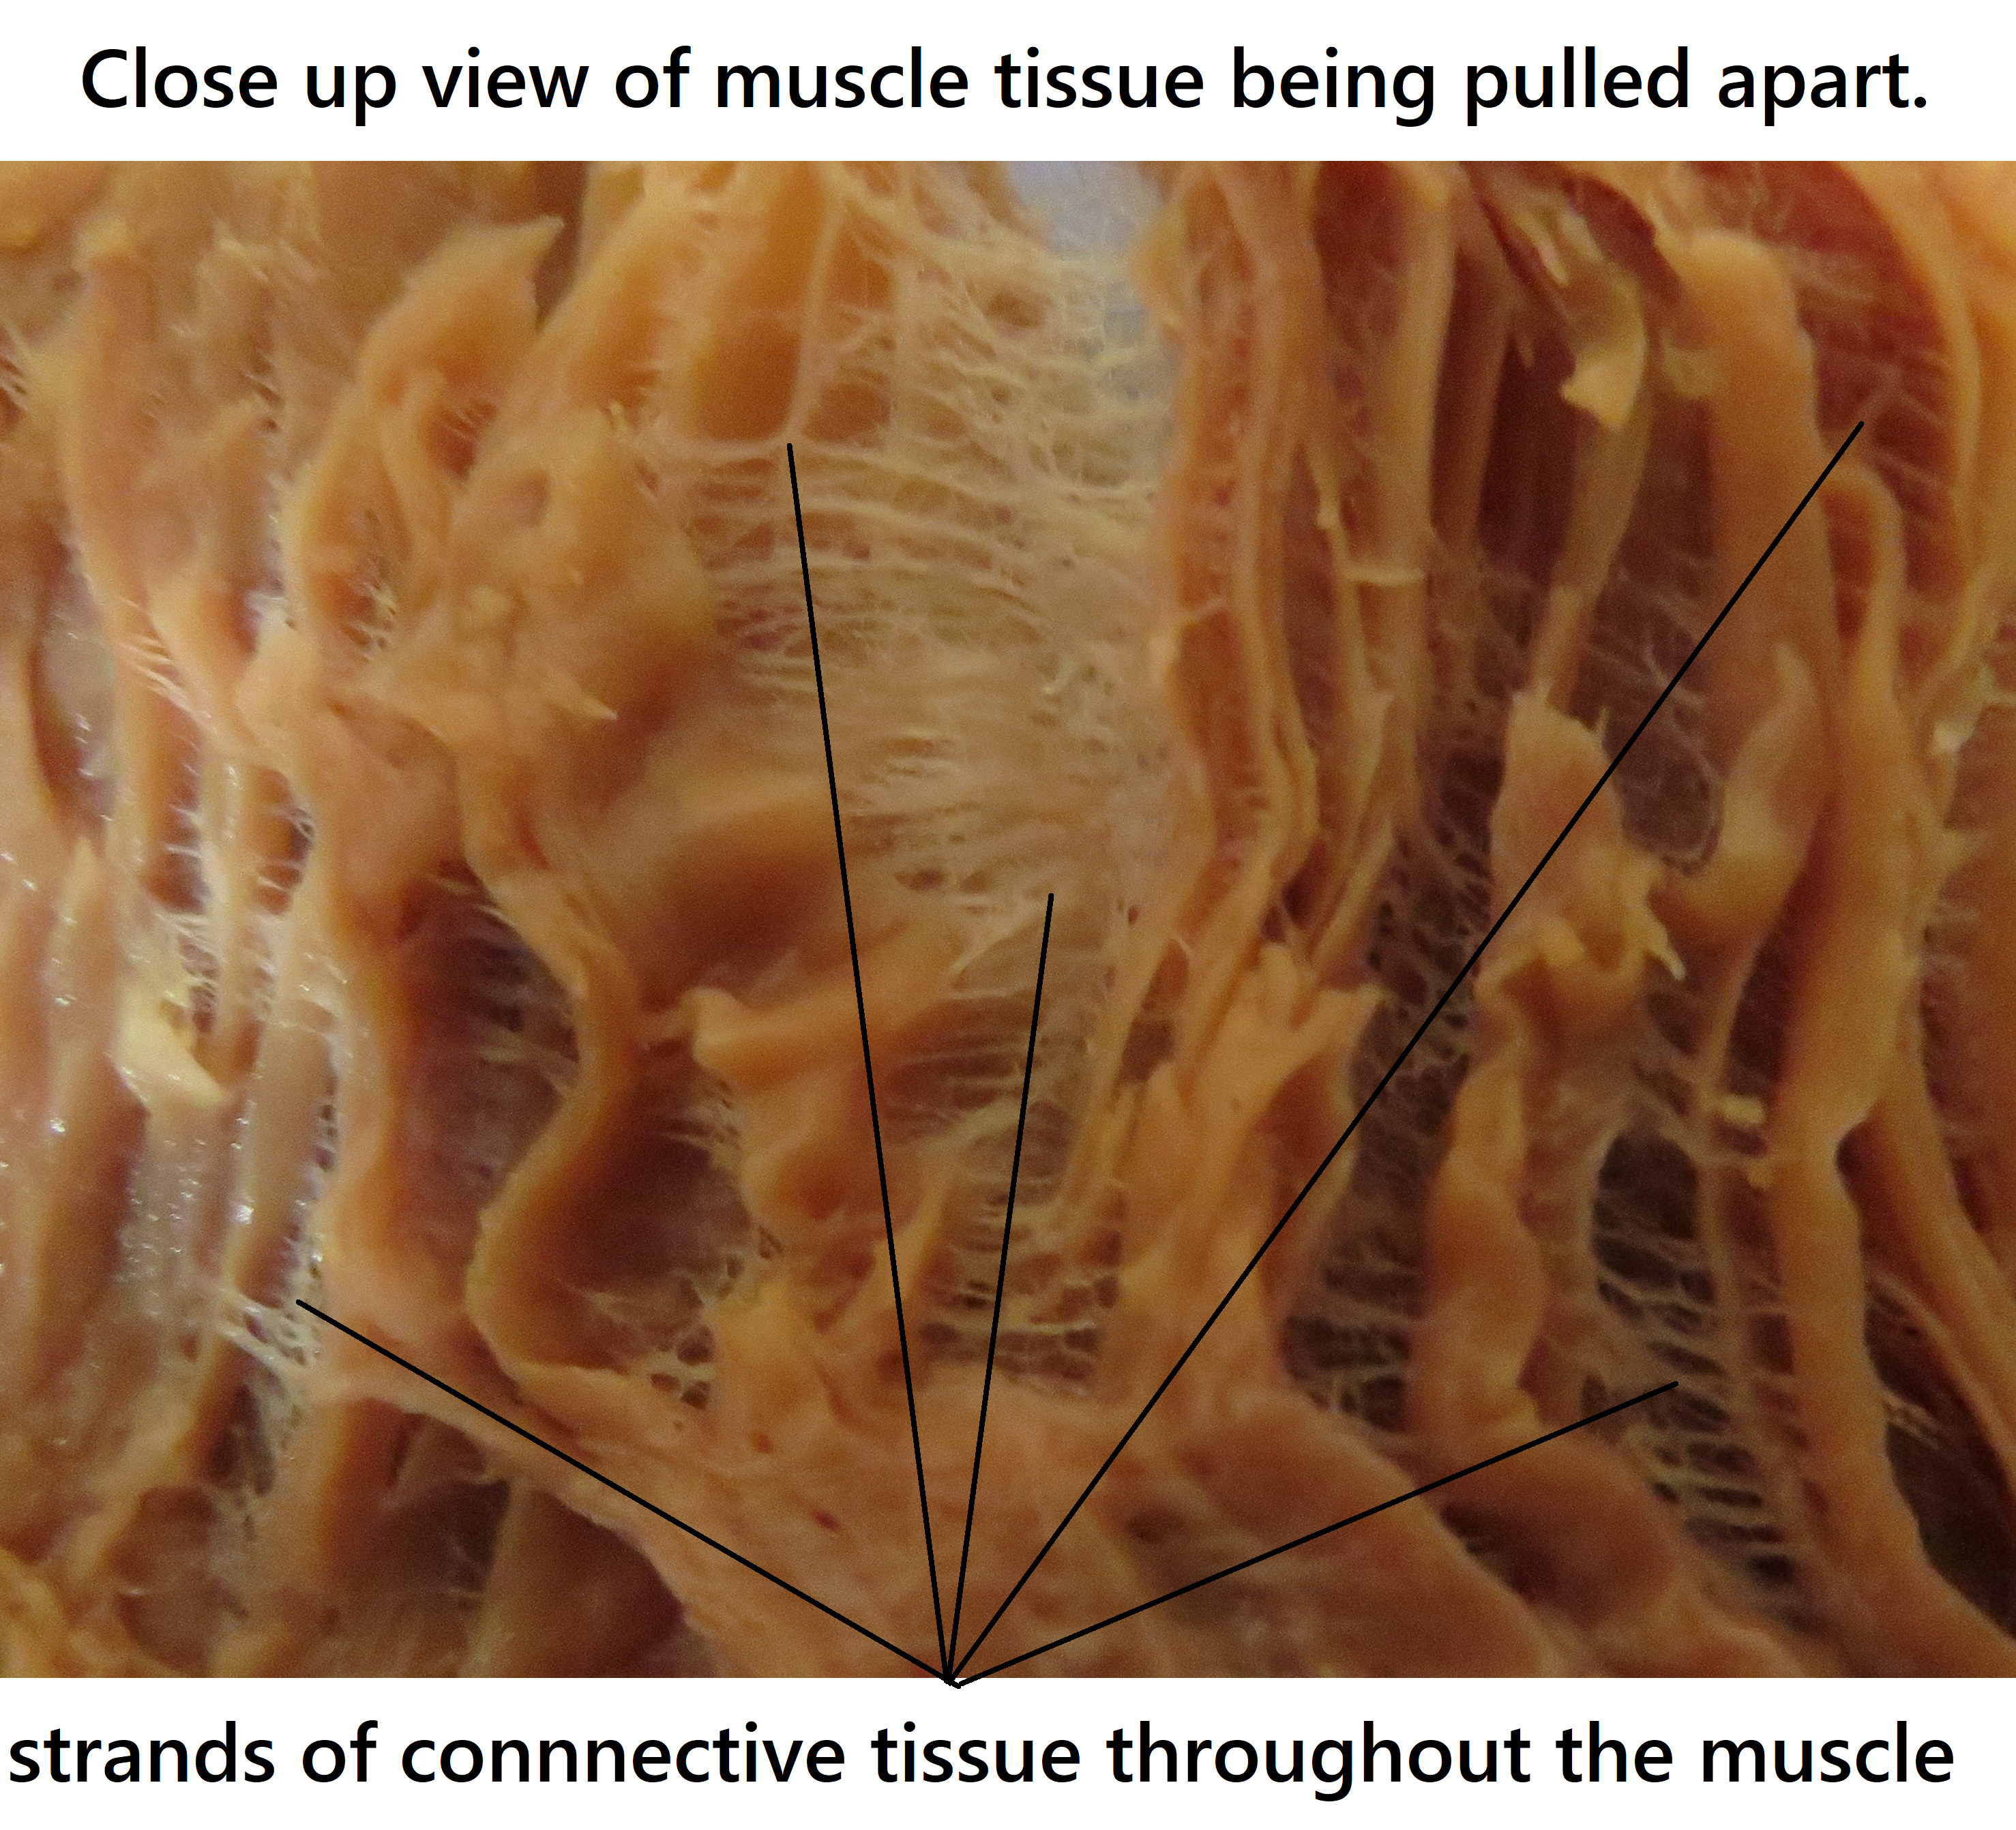 muscle tissue pulled apart showing the strands of connective tissue that are throughout it. Thin threads of connective tissue span the gaps between muscle tissue, a honeycomb-like effect of crosslinked strands, a web of collagen fine fibres.